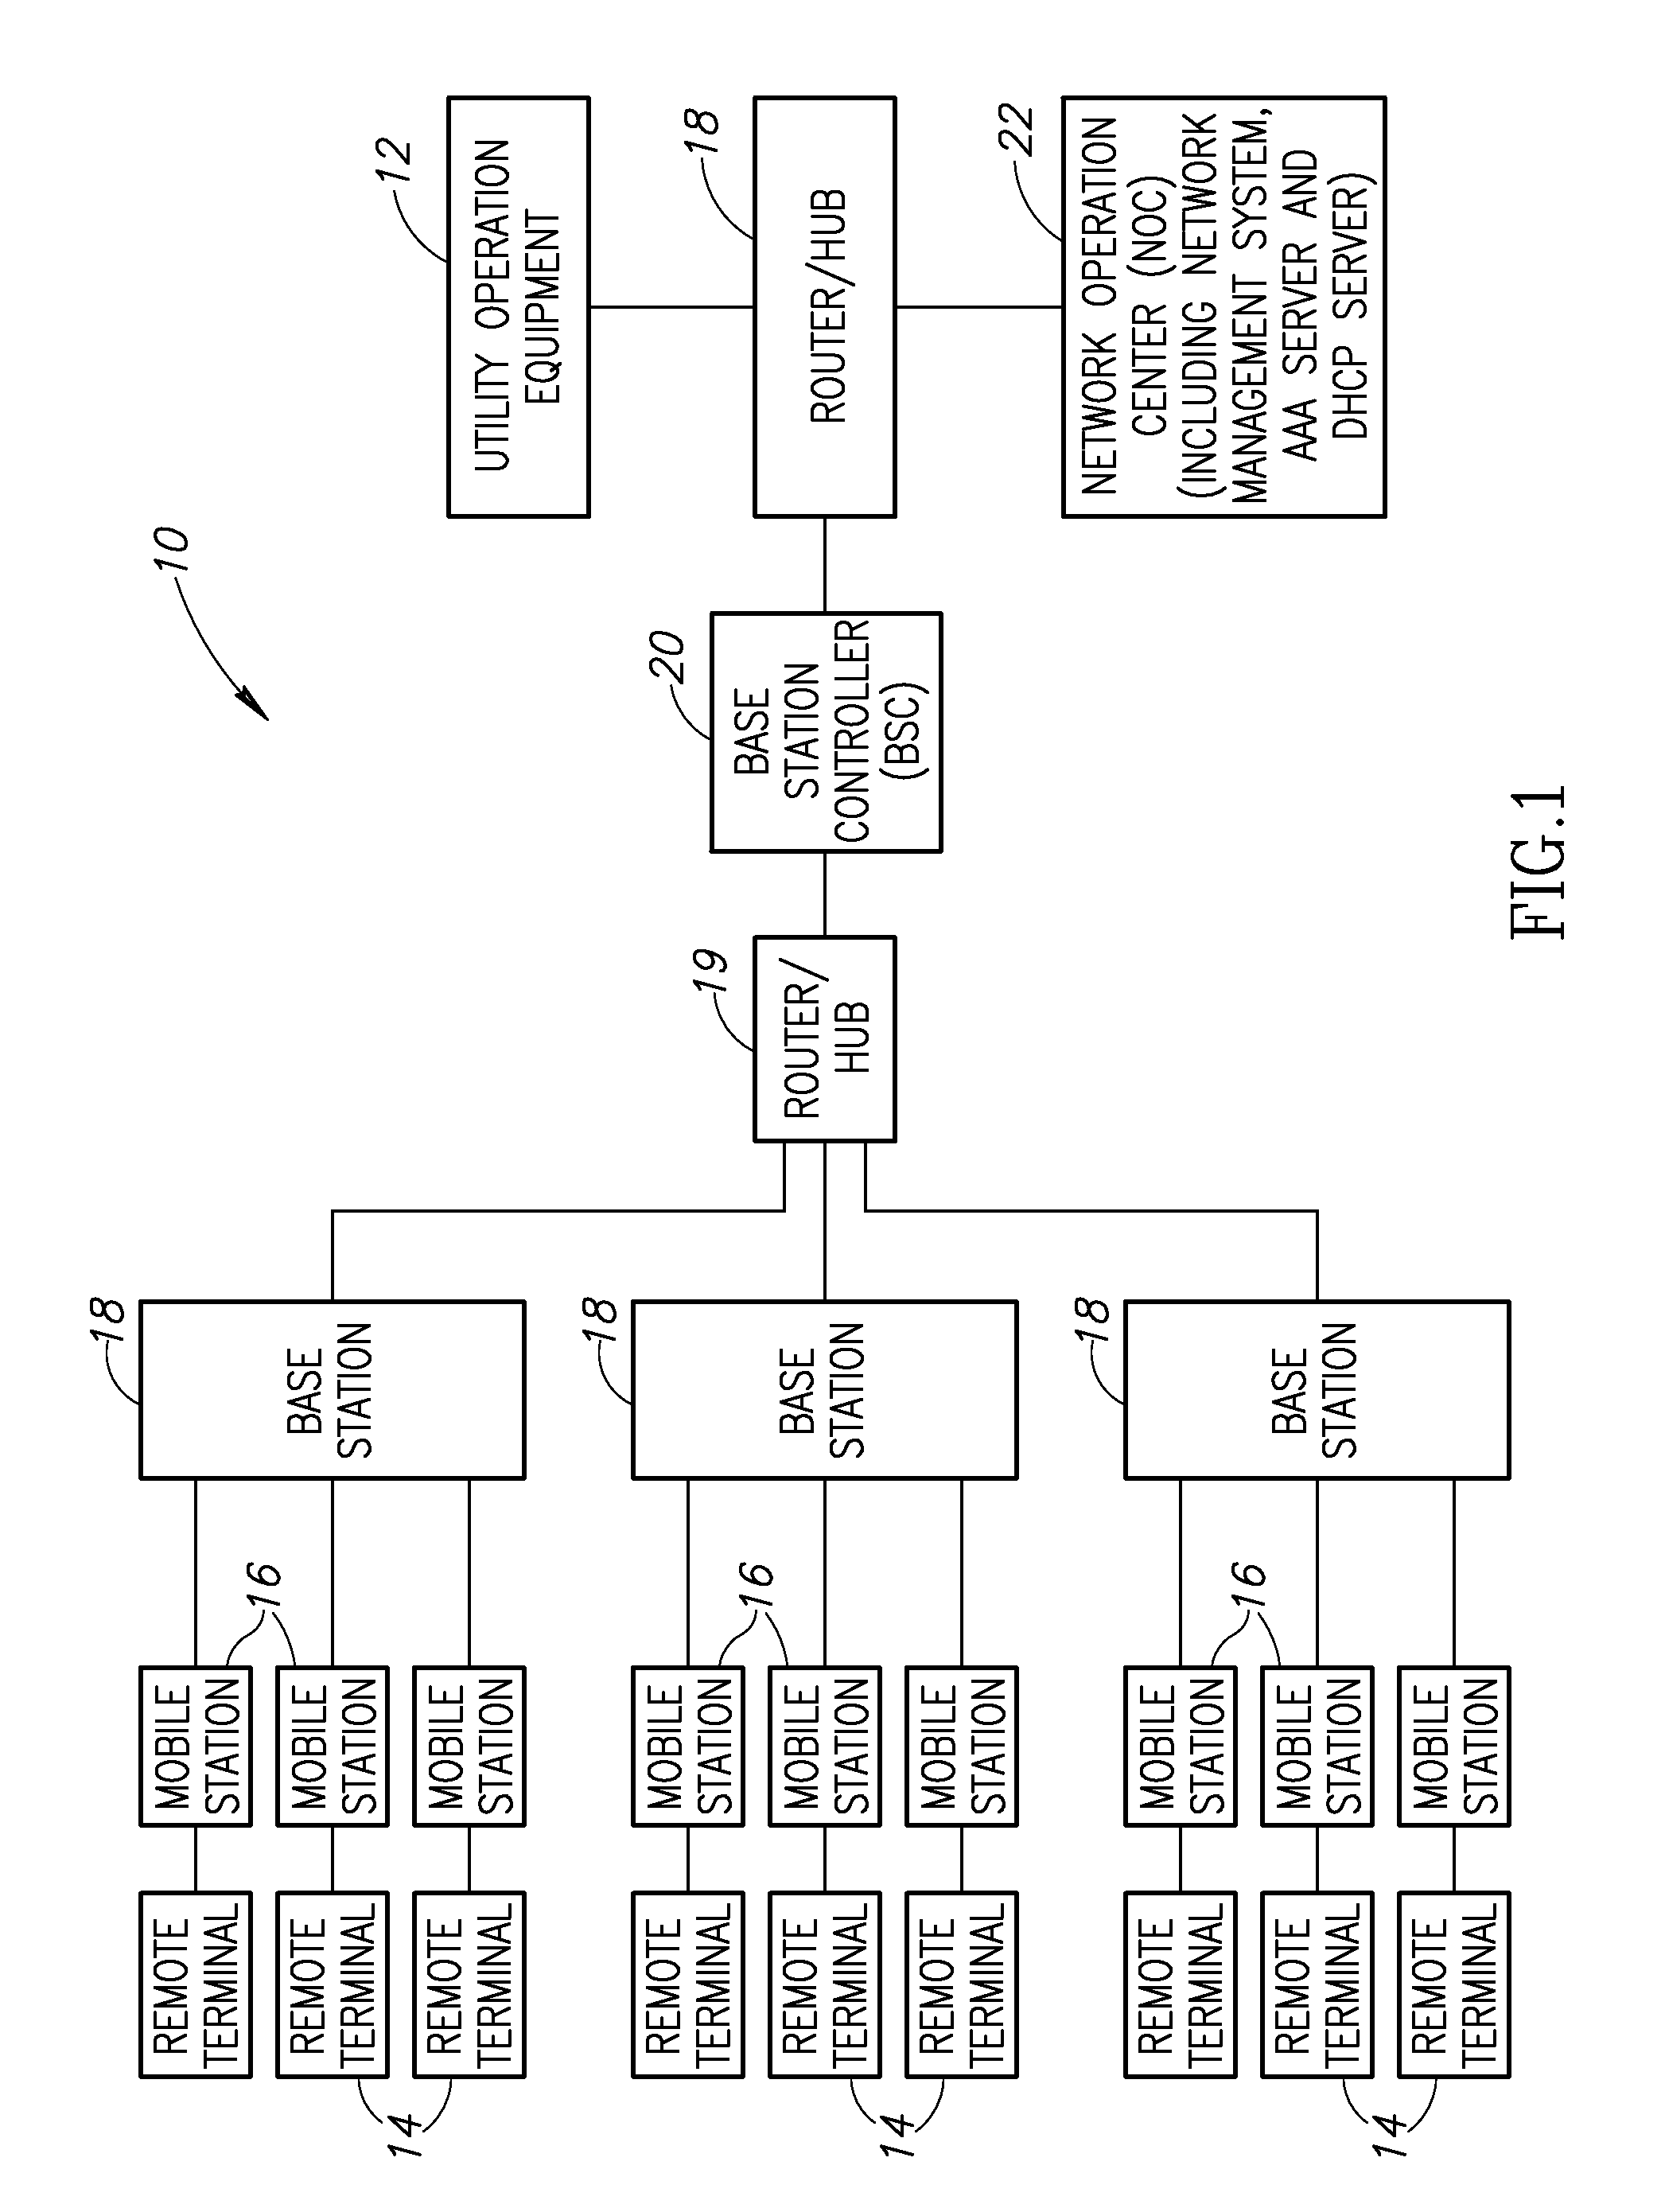 Method and apparatus for long range private broadband wireless communication system